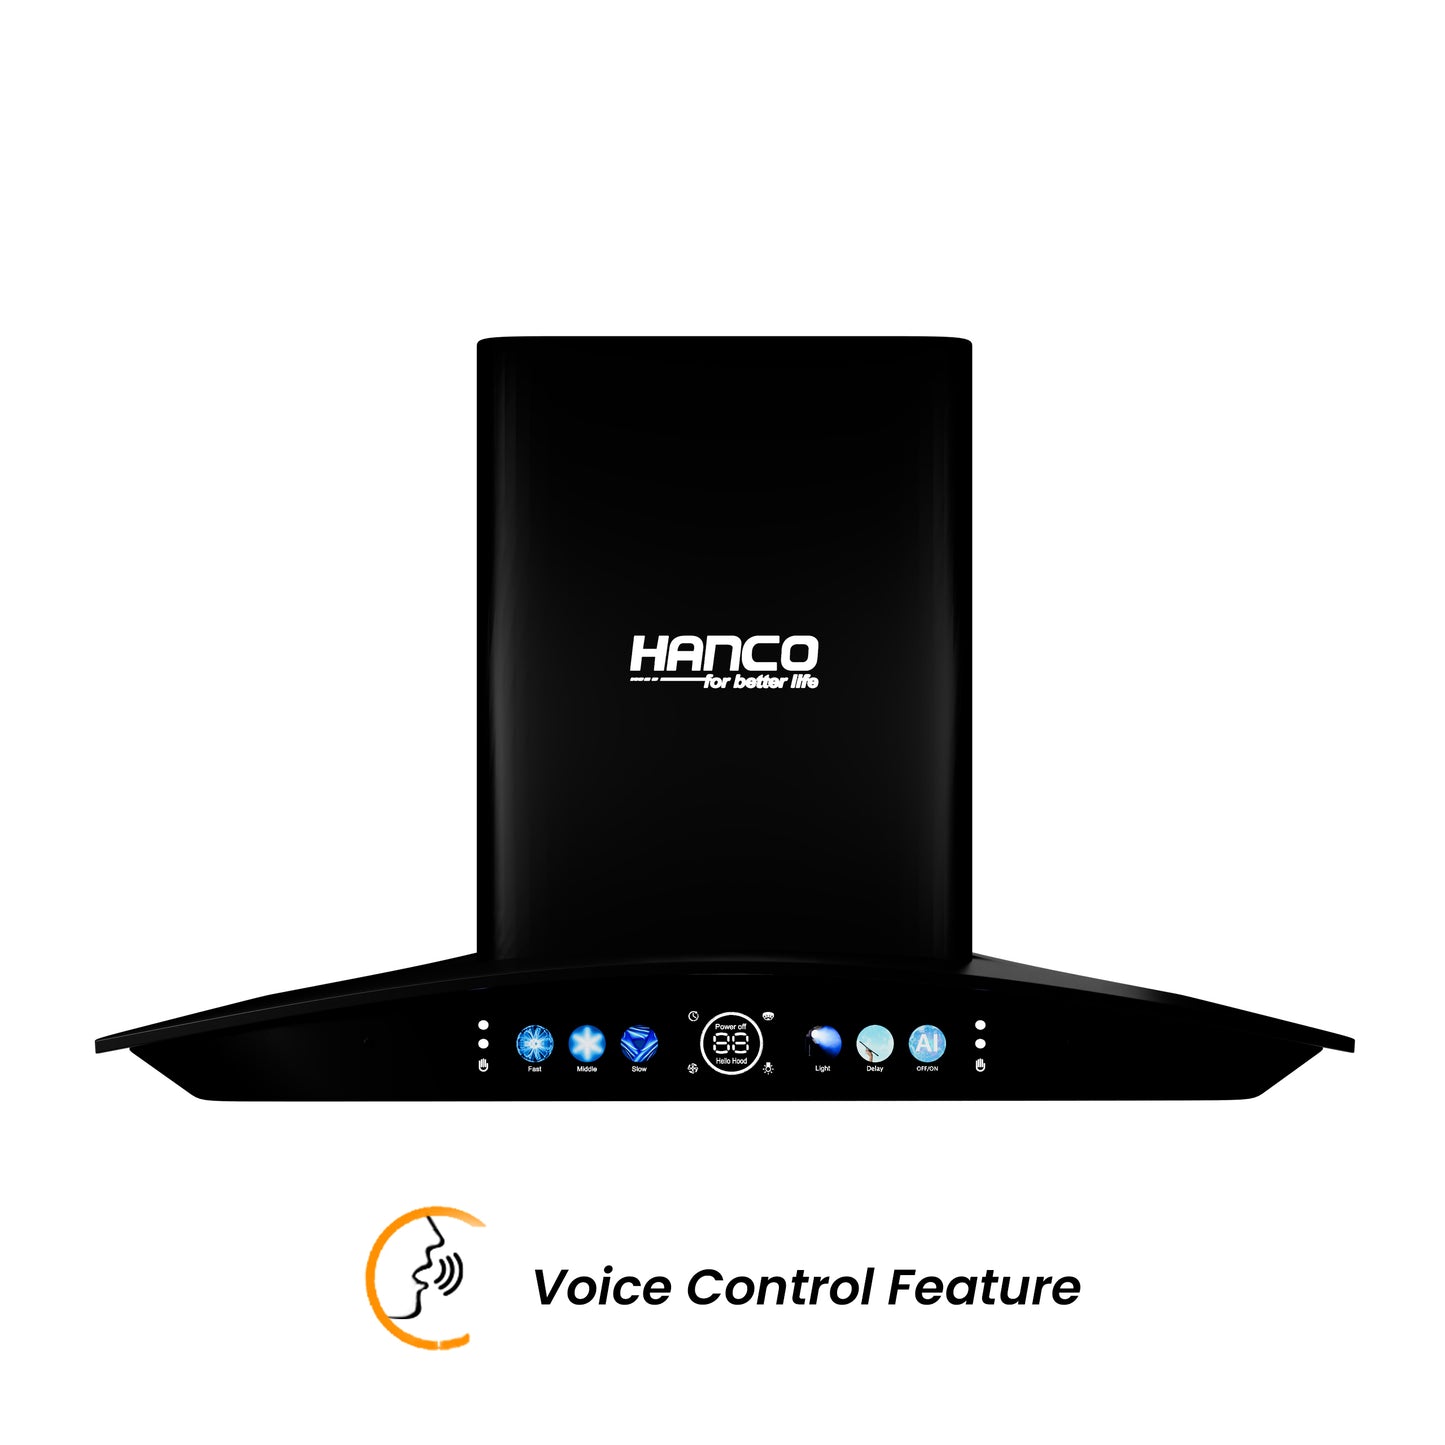 Hanco Hood with Smart Voice Control Model HDE-85 Advance Auto Cleaning, Hand Motion Sensor 1 Year Brand Warranty